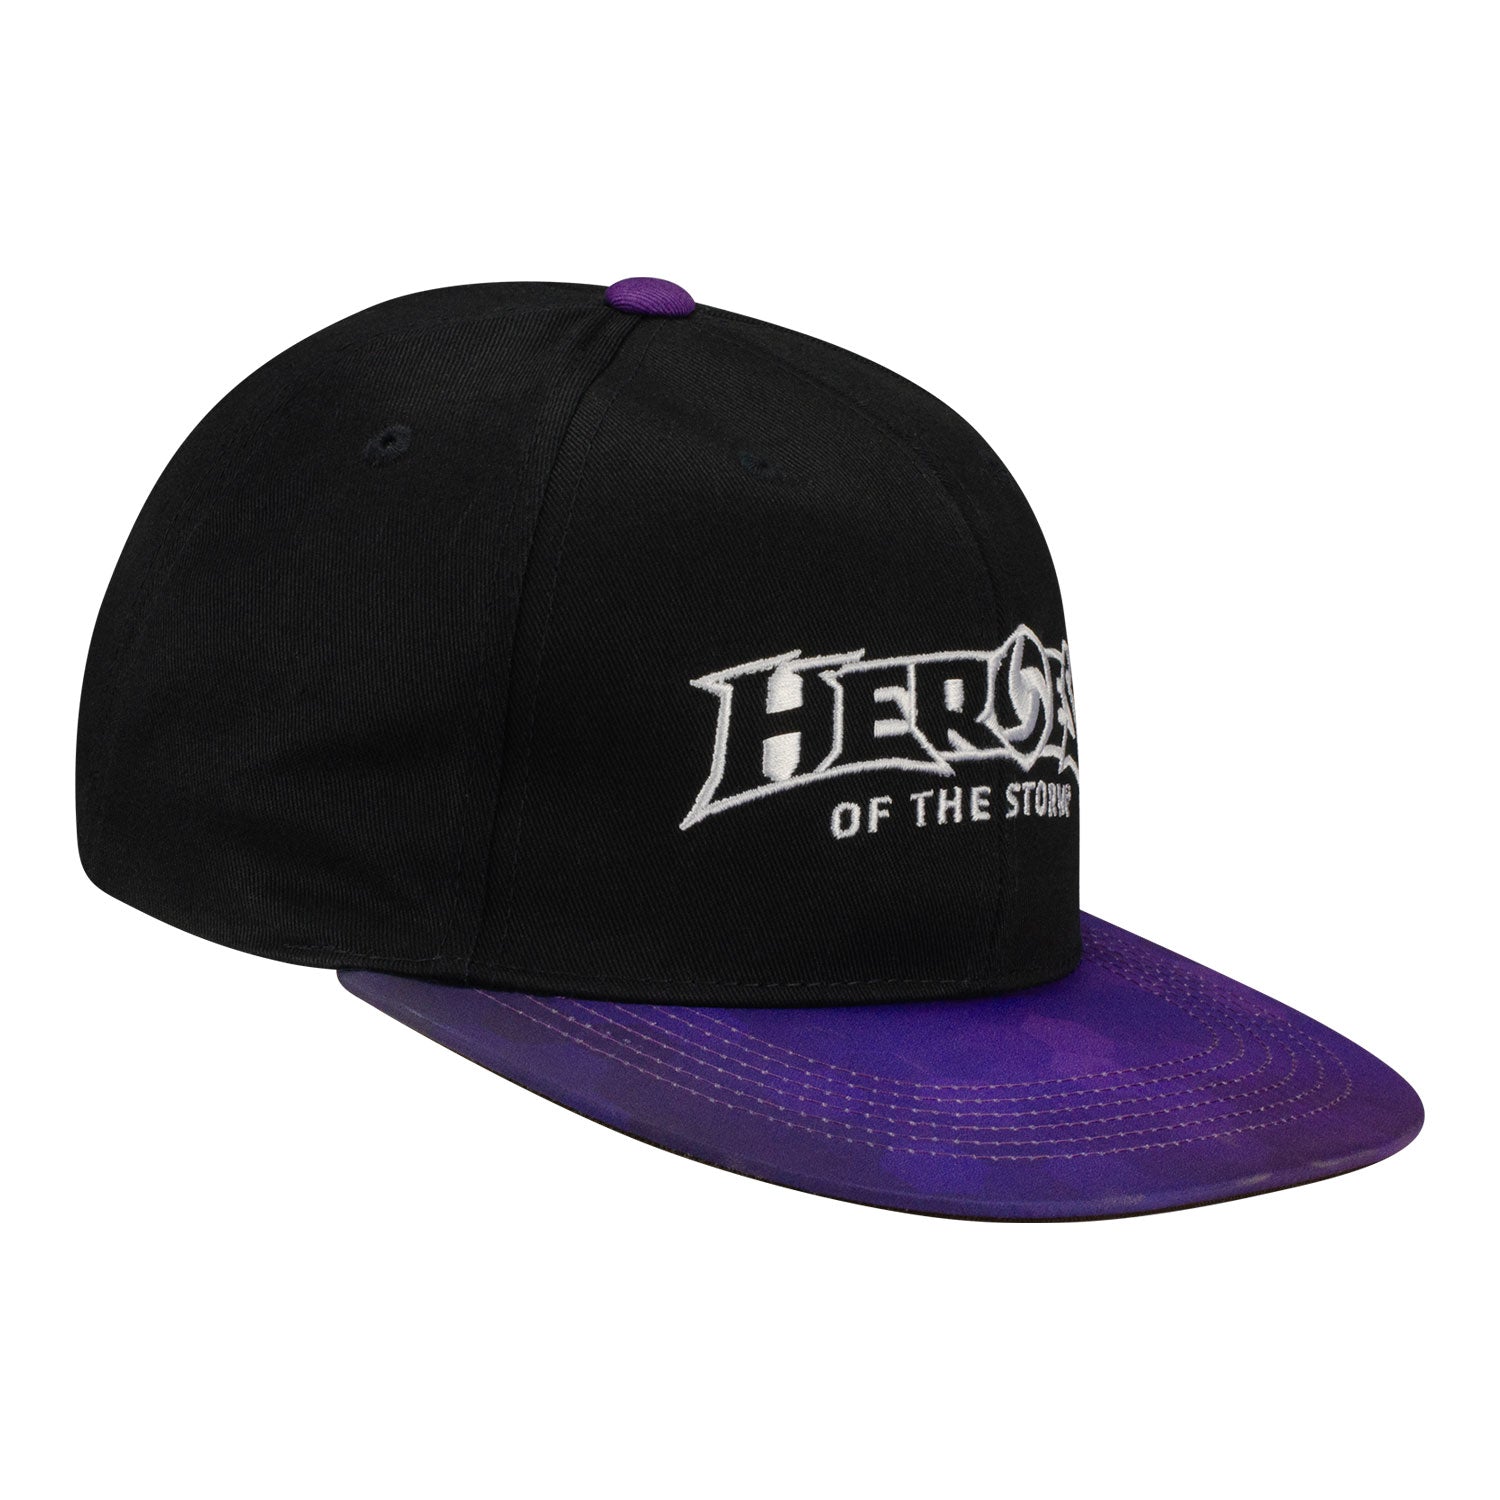 Heroes of the Storm Black Snapback Hat - Right View